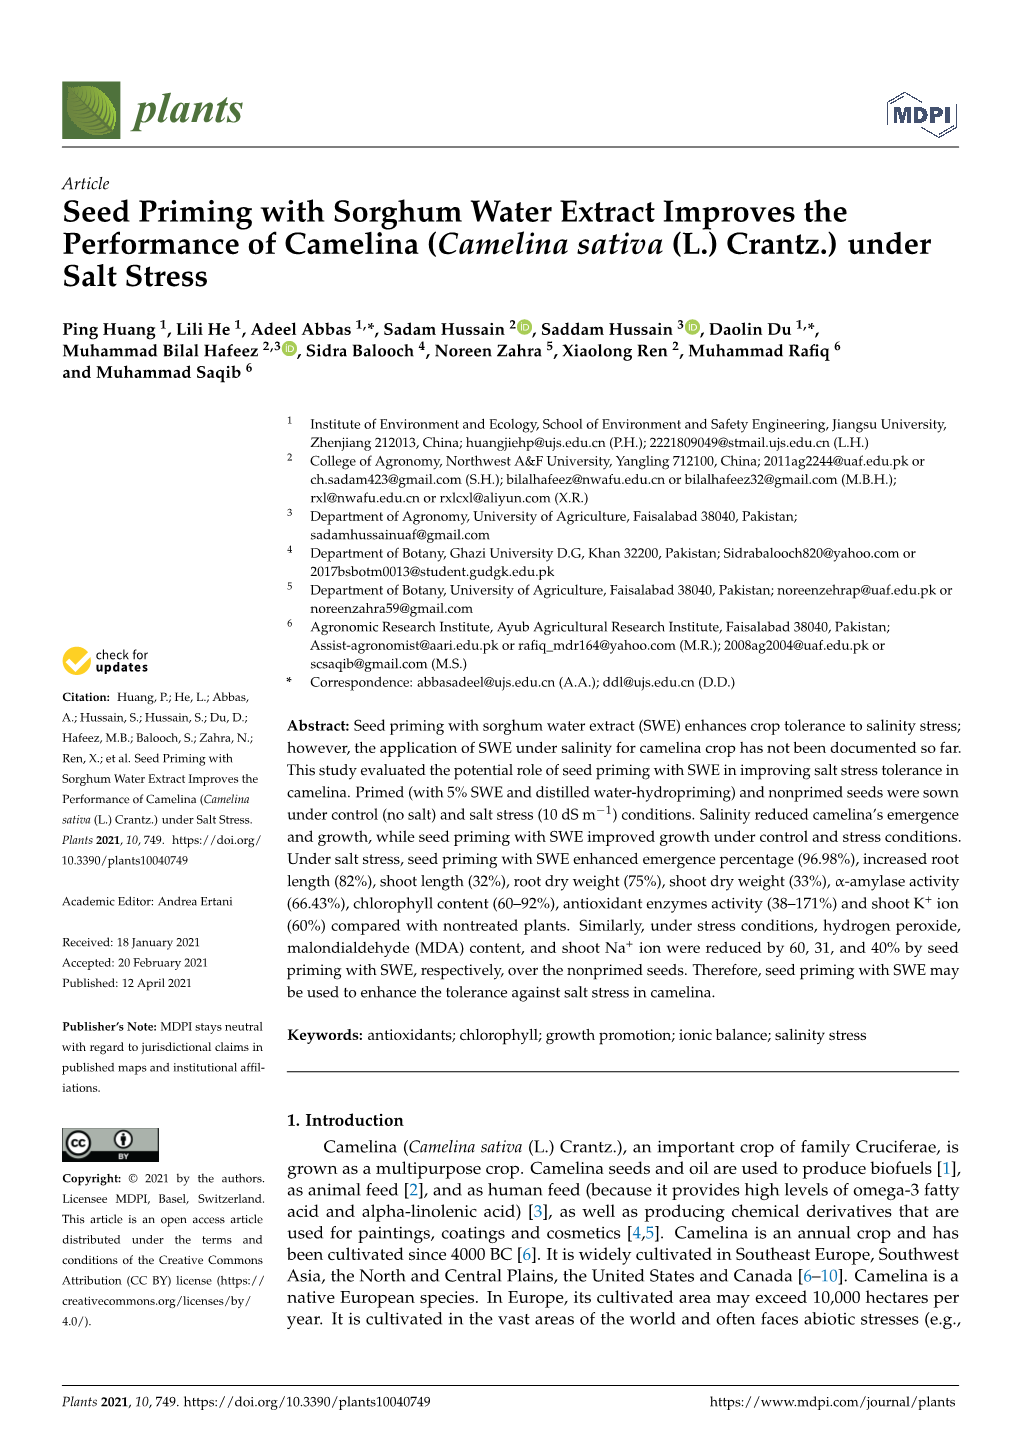 Seed Priming with Sorghum Water Extract Improves the Performance of Camelina (Camelina Sativa (L.) Crantz.) Under Salt Stress